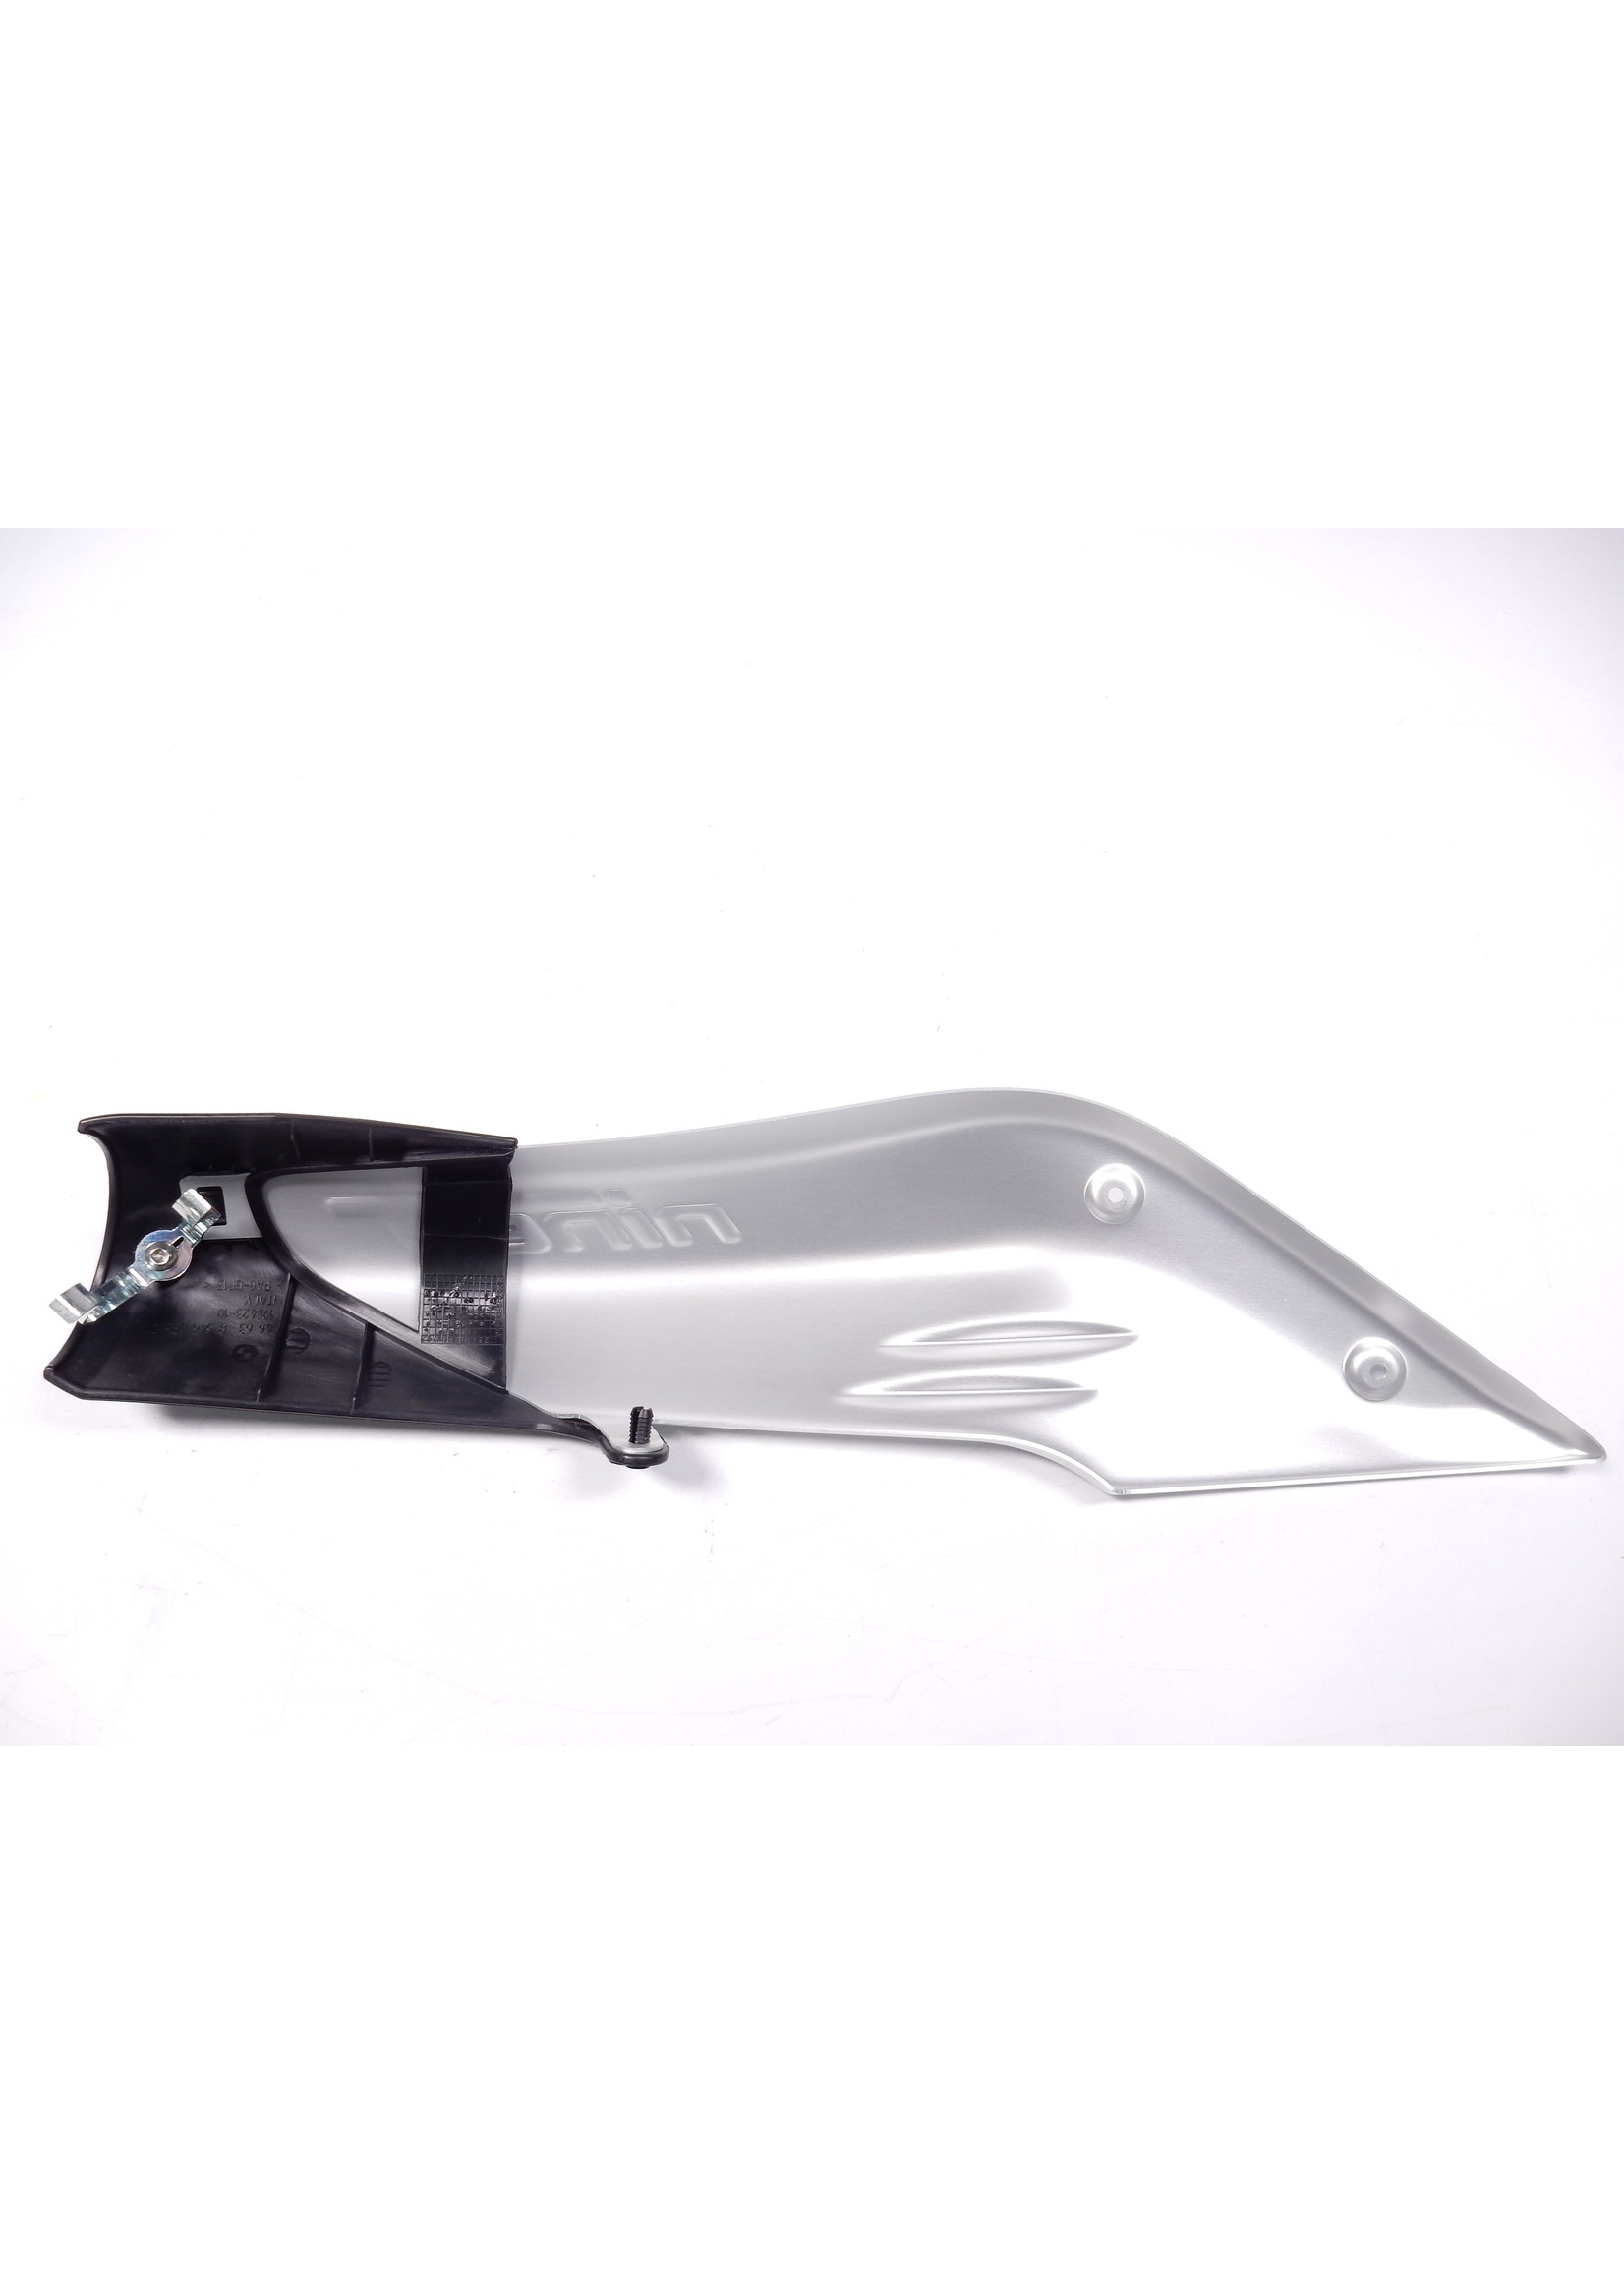 BMW BMW R nineT Urban G/S Cover, unfiltered-air snorkel, rear / Cover, unfiltered-air snorkel, front / 46638546494 / 46638546495